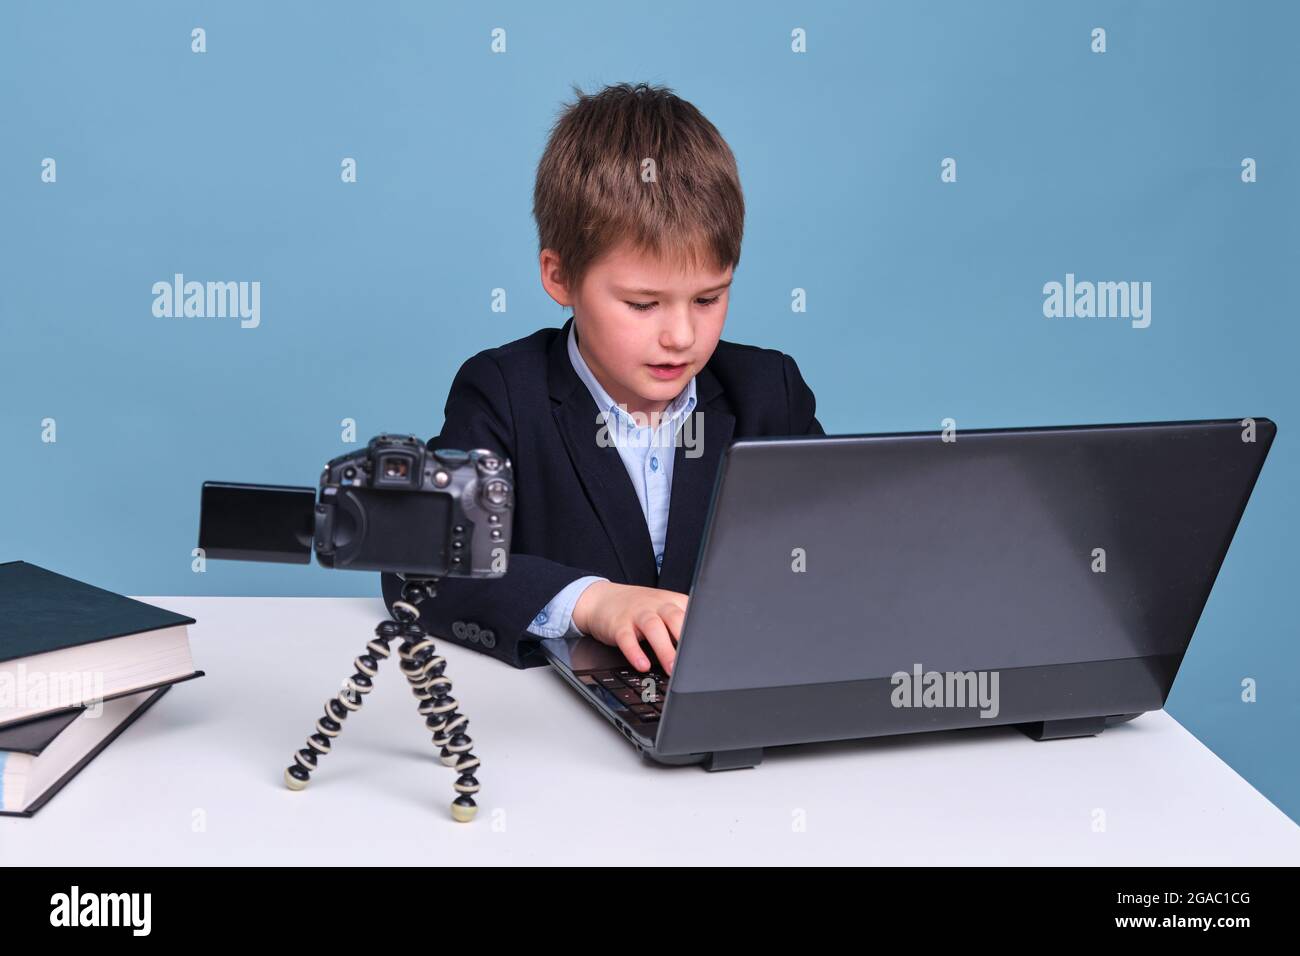 A Boy In A School Suit Writes With A Camera At A Computer During Distance Learning Copy Space On A Blue Studio Background Stock Photo Alamy